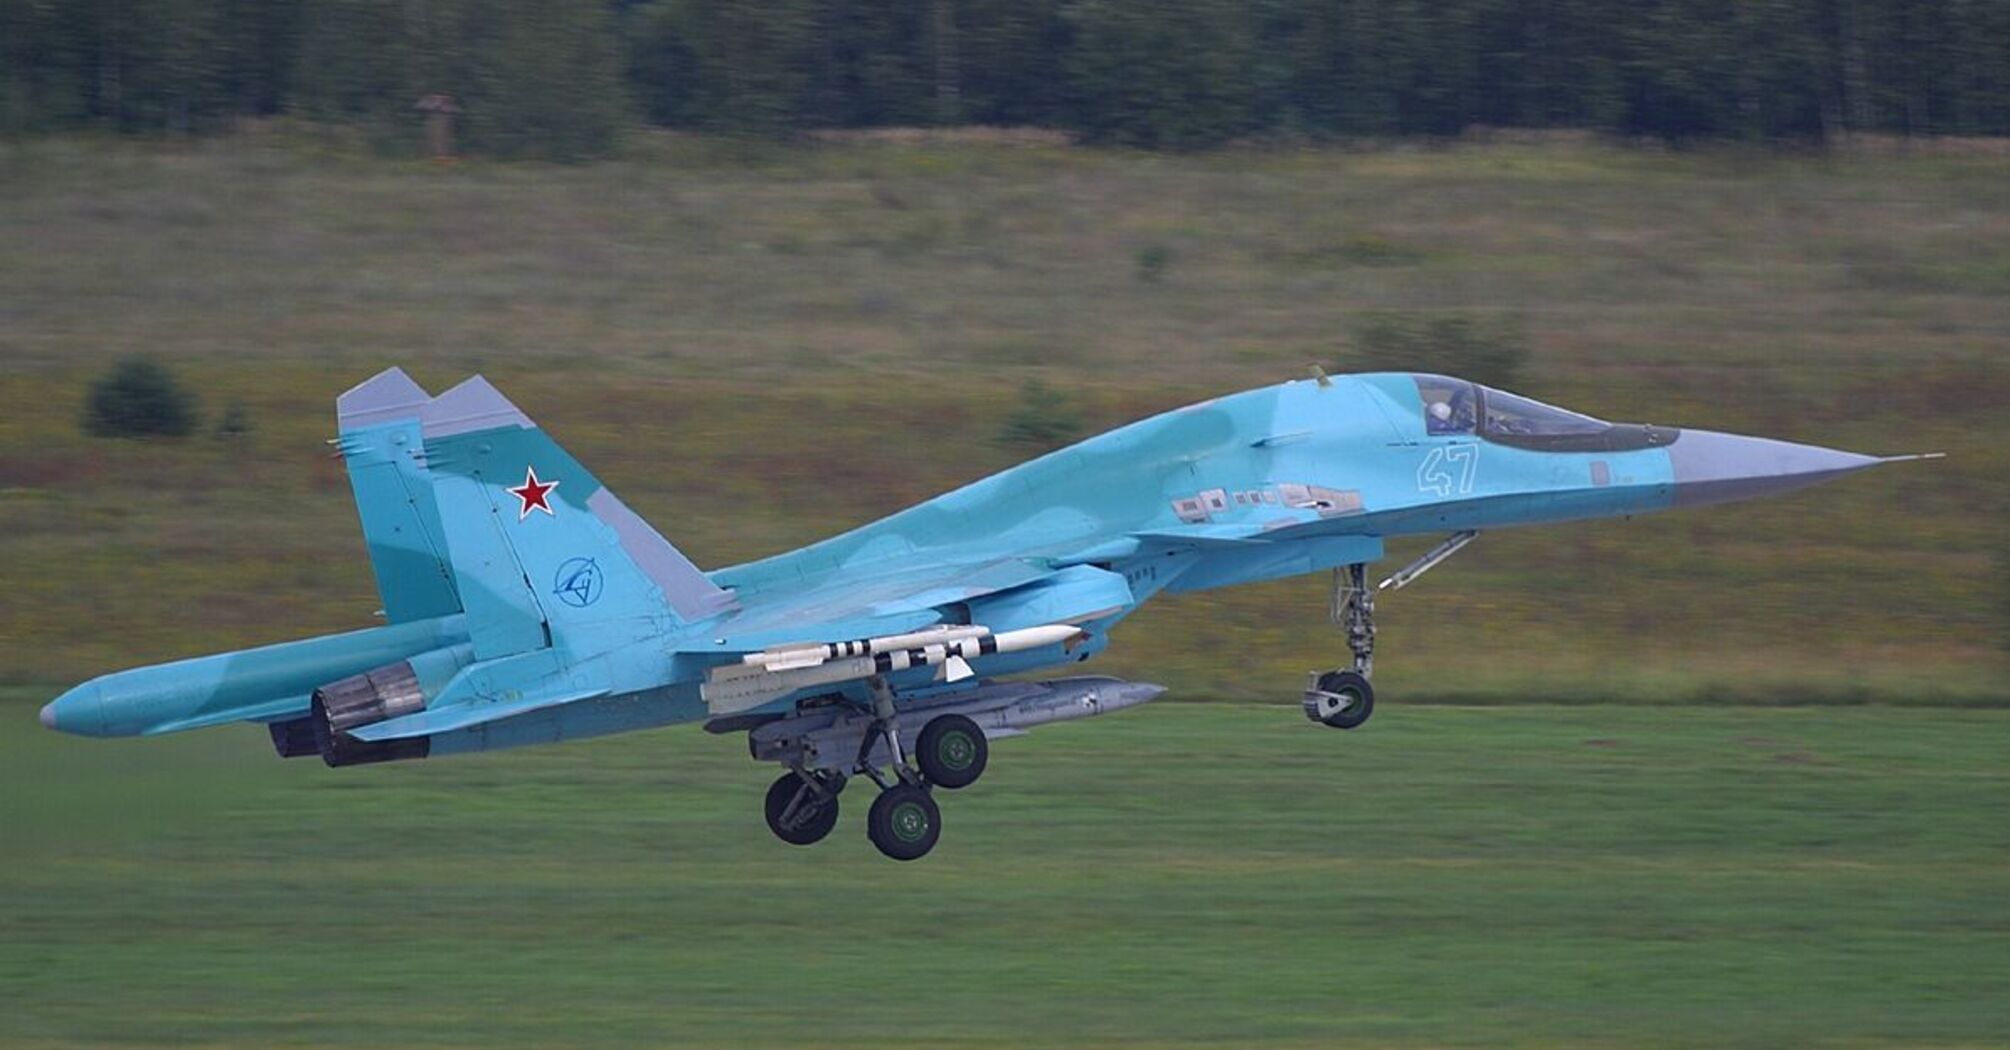 Carriers of guided bombs: it became known how many Su-34s Russia currently produces and has in service